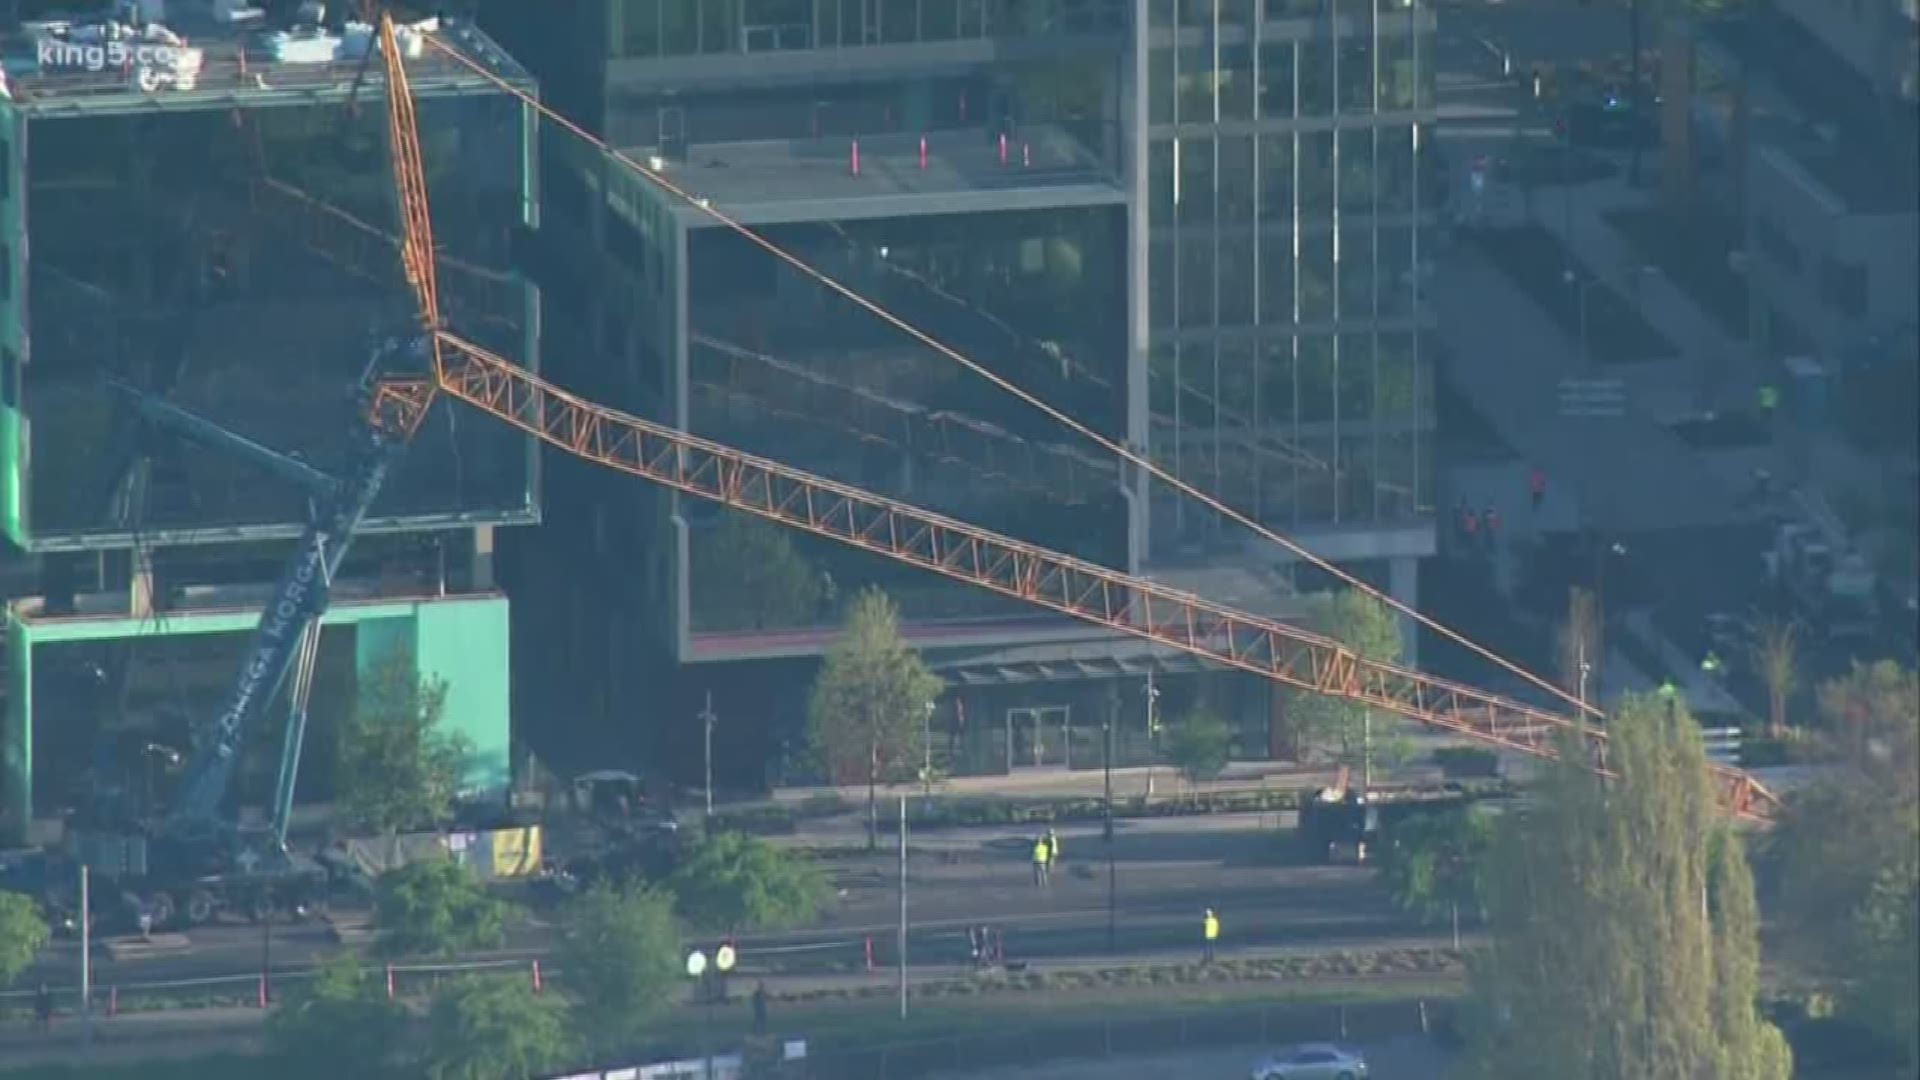 Dozens of experts will be involved in the investigation into the deadly crane collapse.